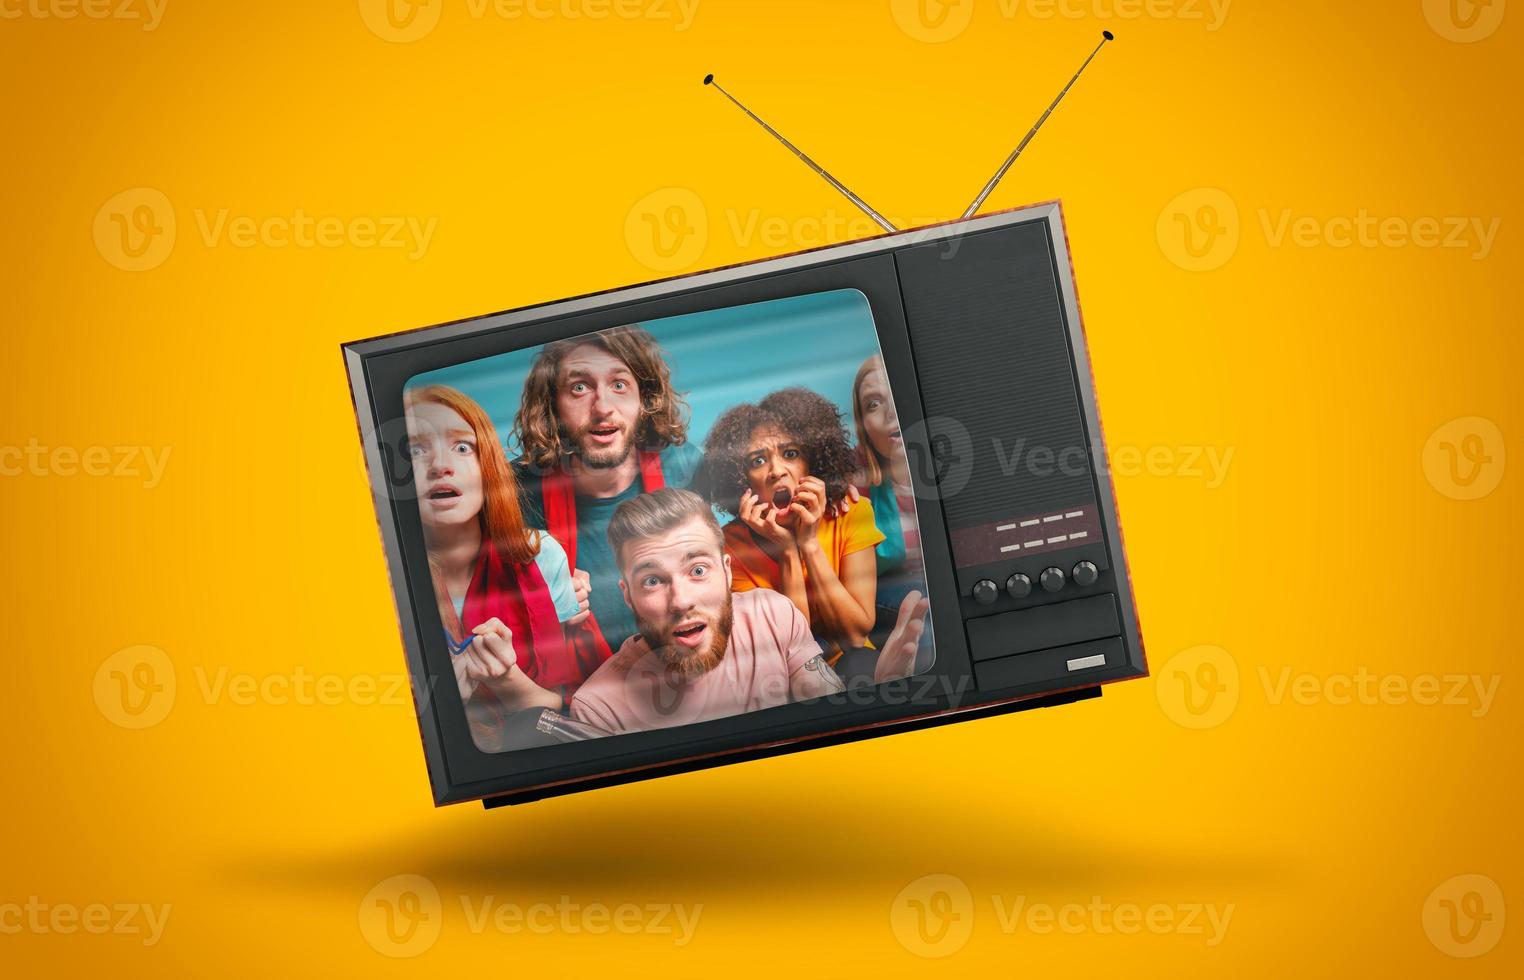 Vintage TV suspended in the air on a yellow background photo